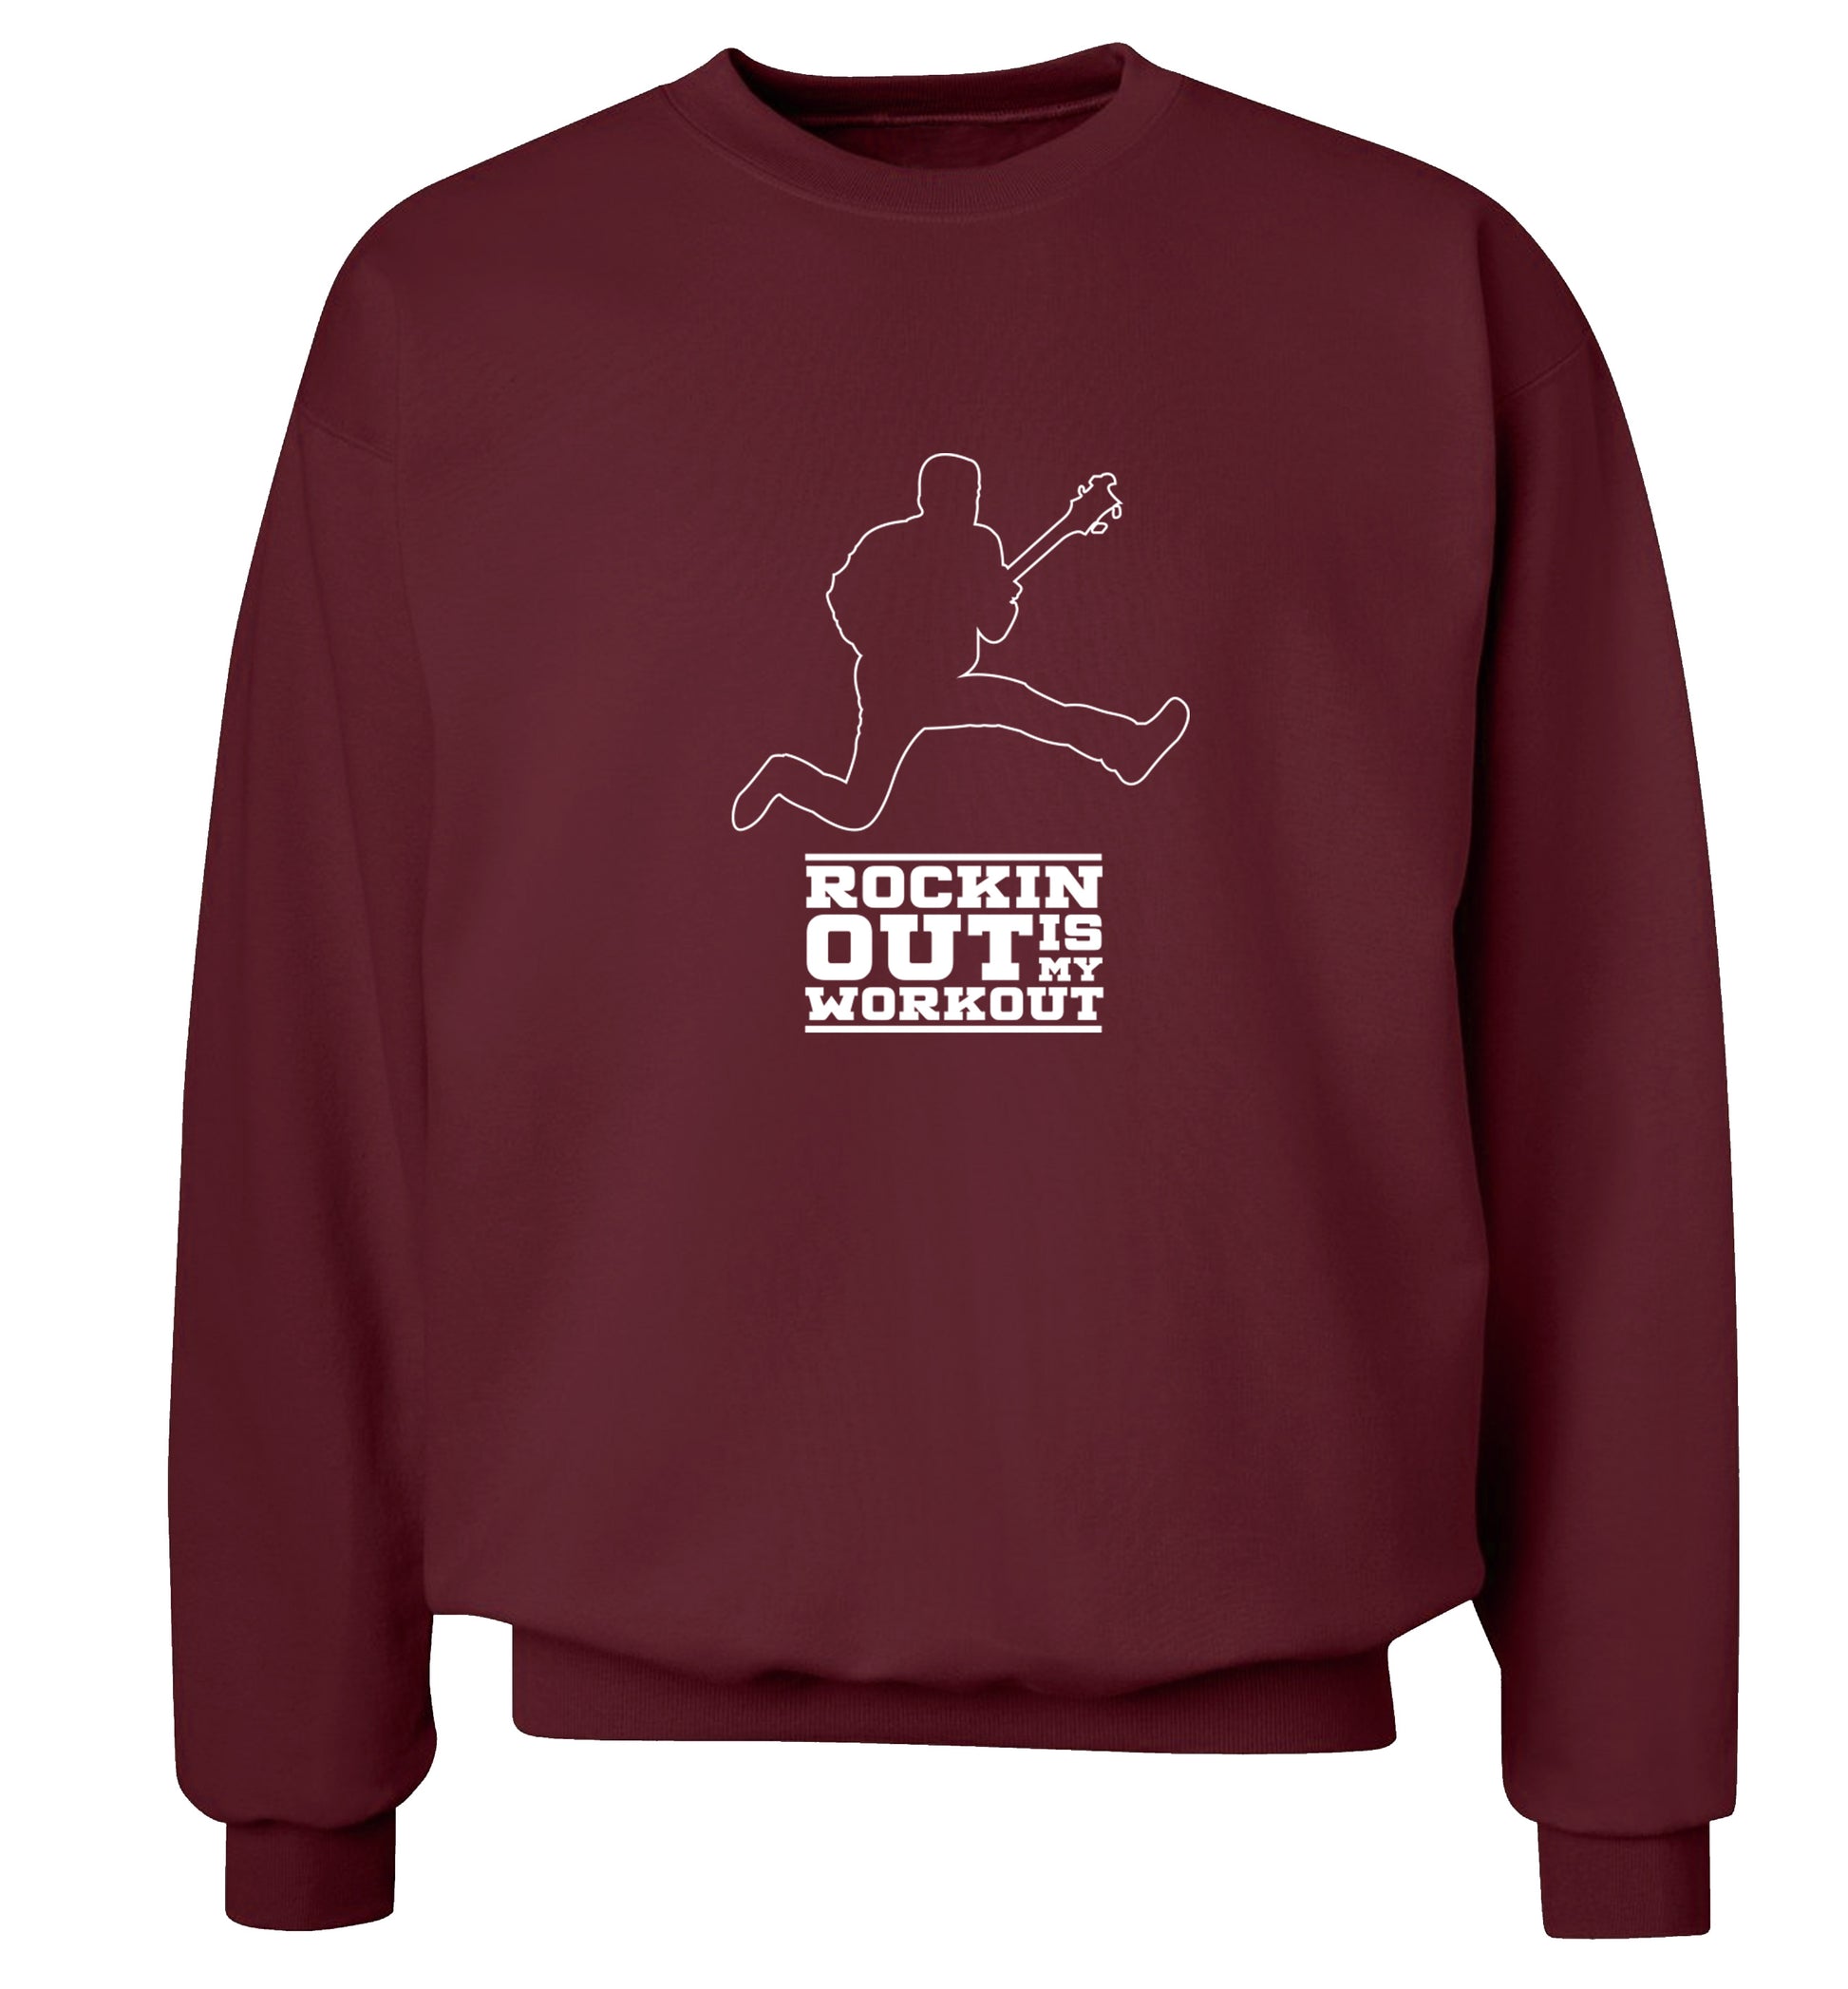 Rockin out is my workout 2 Adult's unisex maroon Sweater 2XL